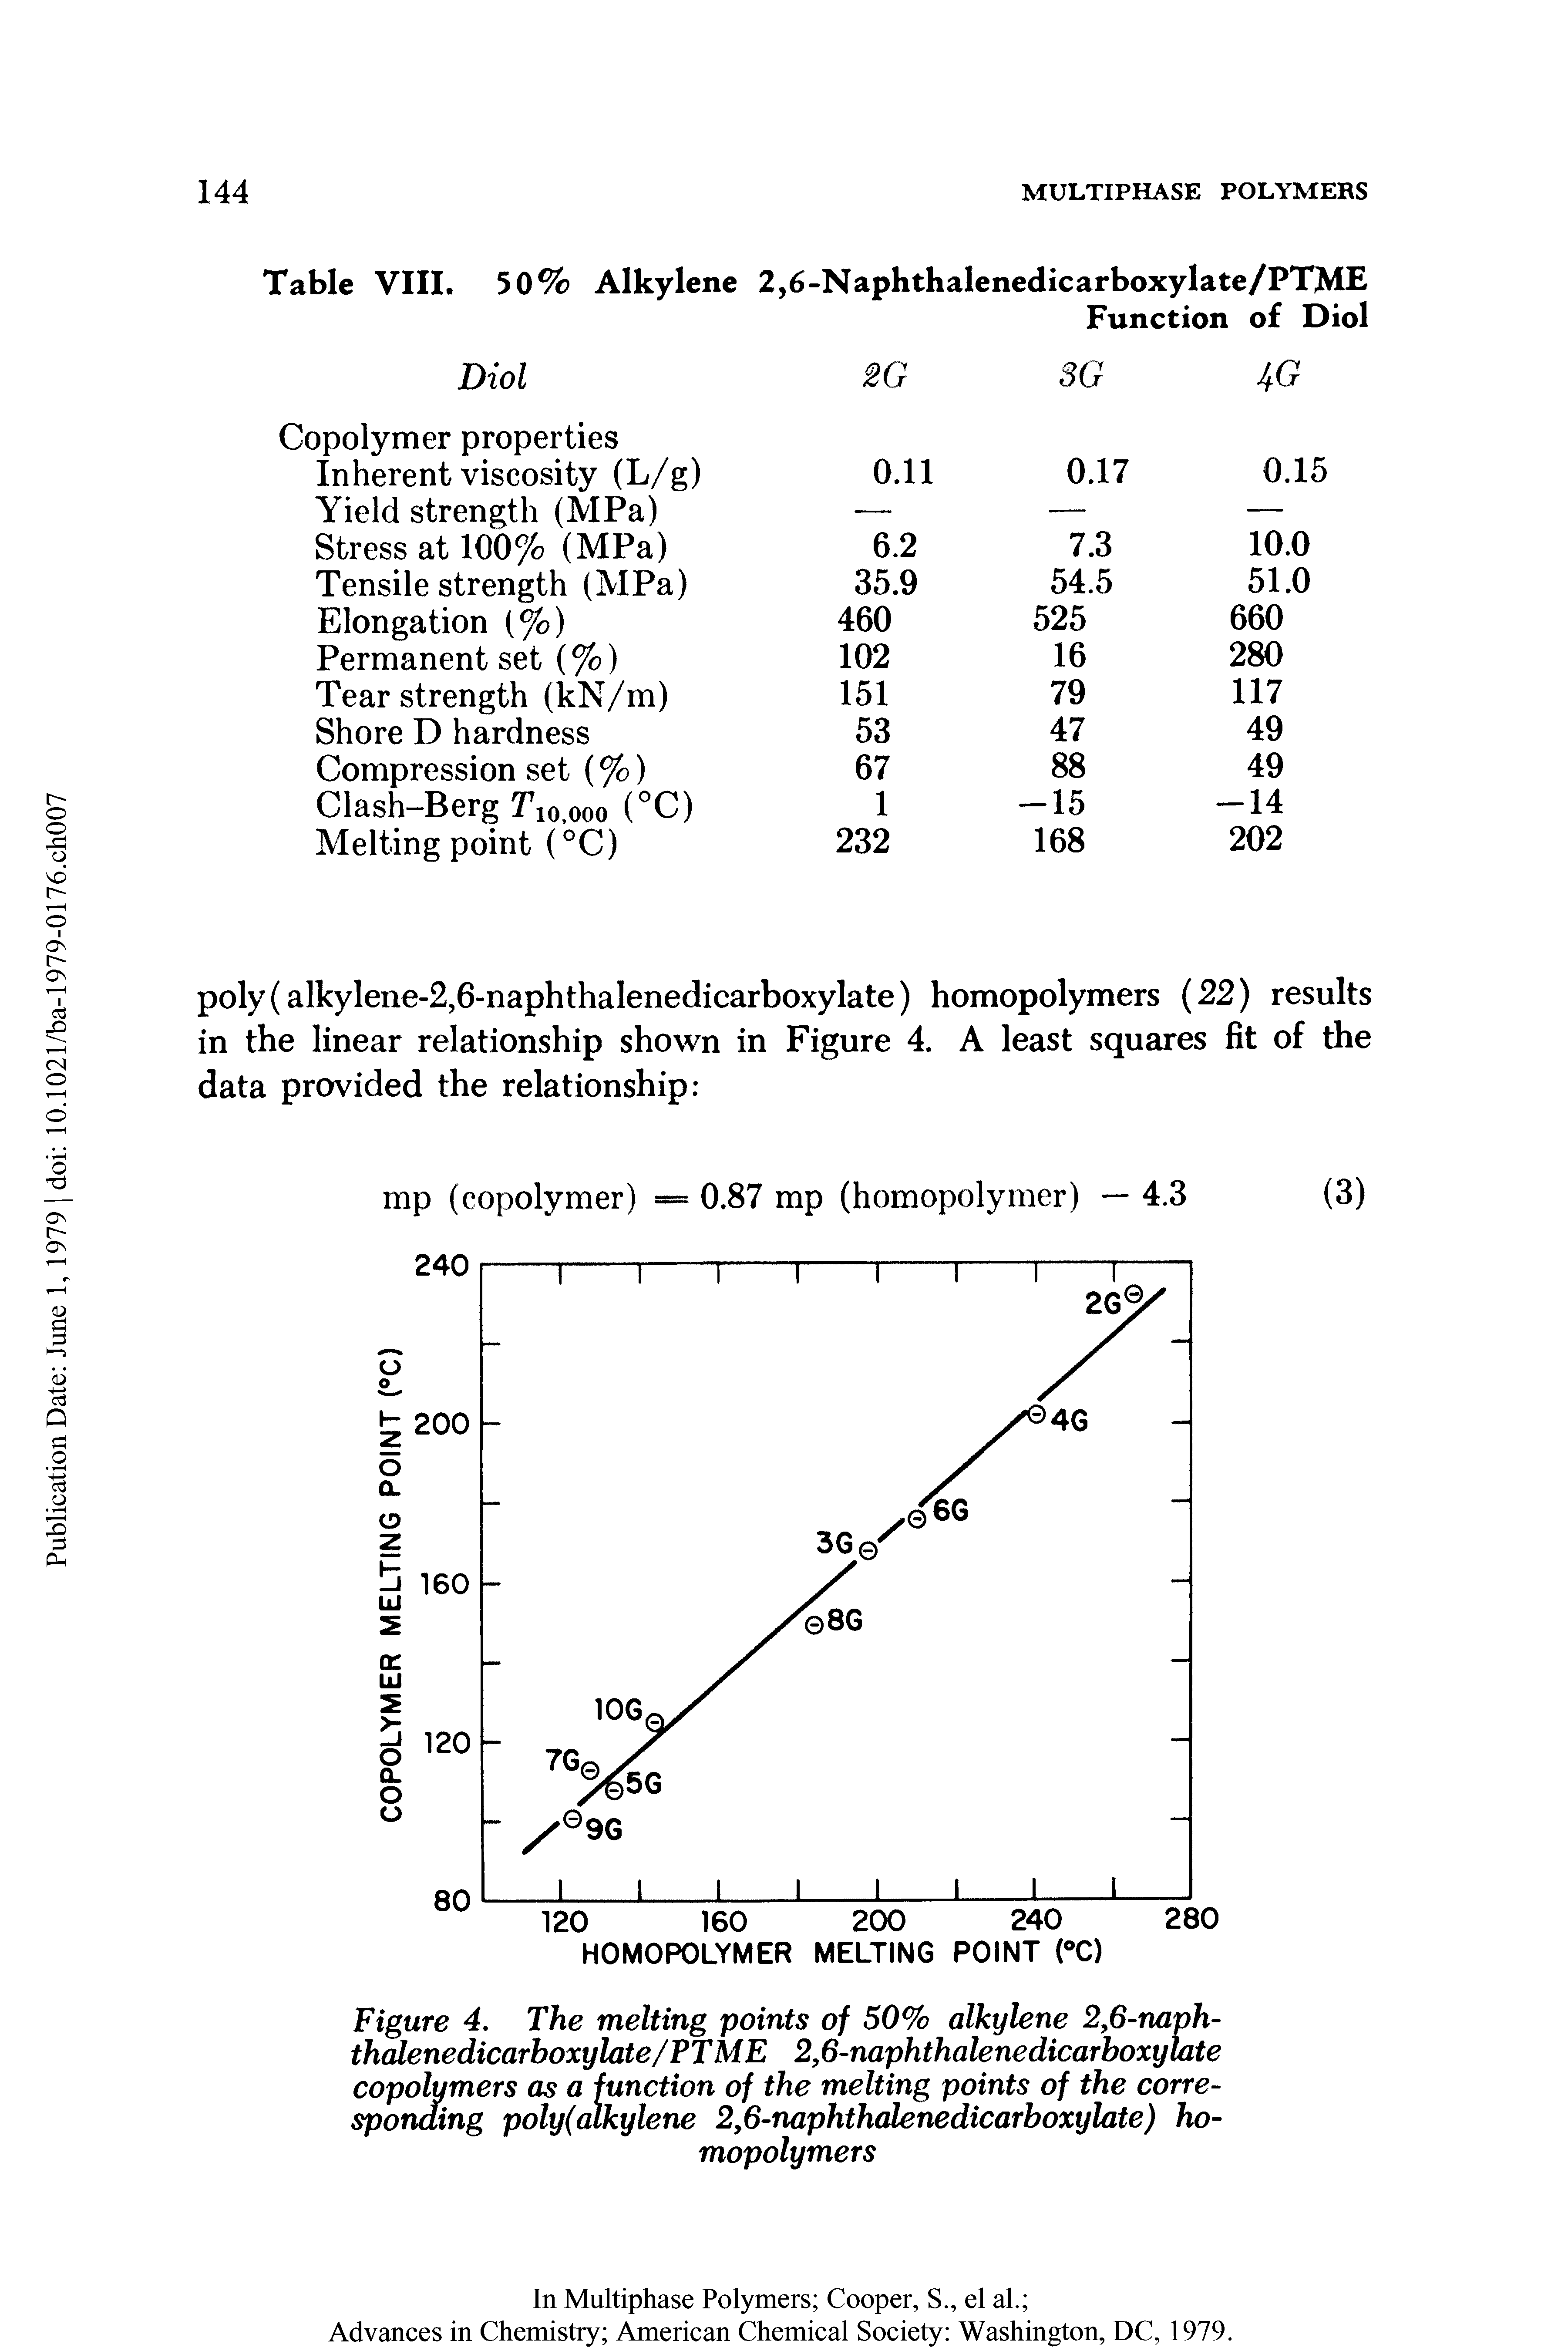 Figure 4. The melting points of 50% alkylene 2,6-naphthalene dicarboxylate/FT ME 2,6-naphthalenedicarboxylate copolymers as a function of the melting points of the corresponding poly(alkylene 2,6-naphthalenedicarboxylate) homopolymers...